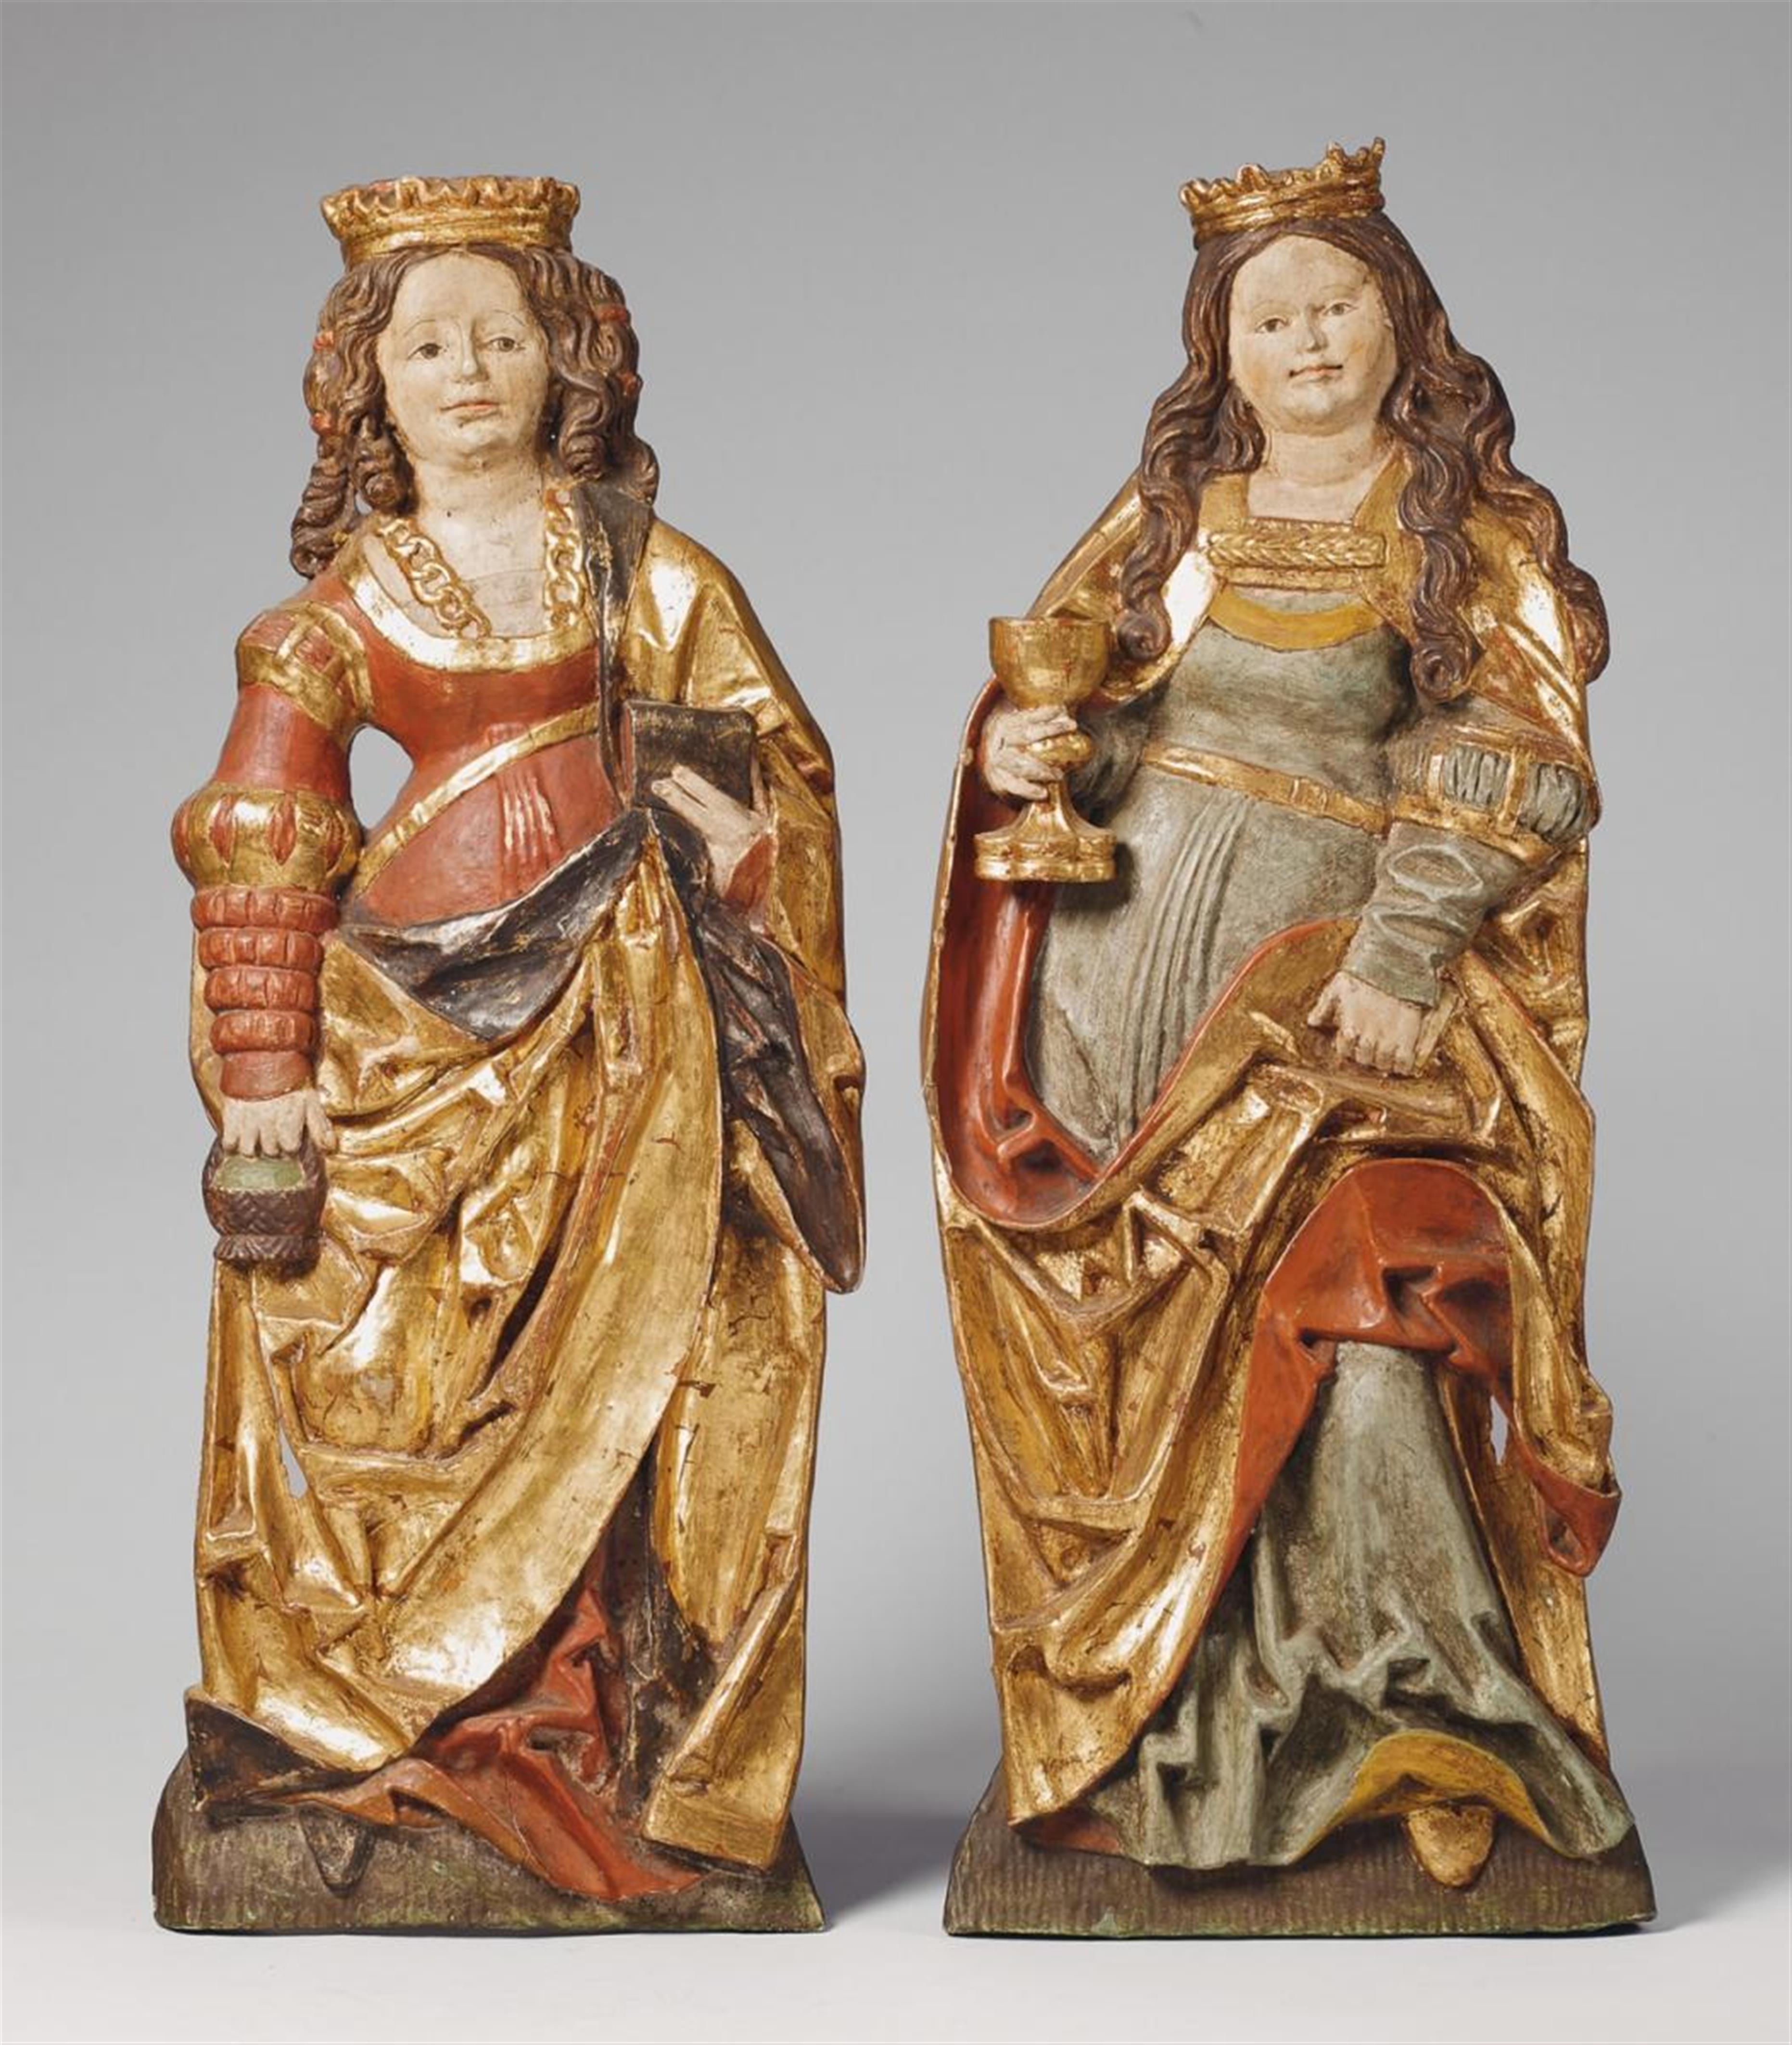 Swabia, second half 15th Century - A PAIR OF SWAIBAN CARVED WOOD HIGH RELIEF FIGURES OF SAINT DOROTHEA AND SAINT BARBARA, SECOND HALF 15TH CENTURY - image-1